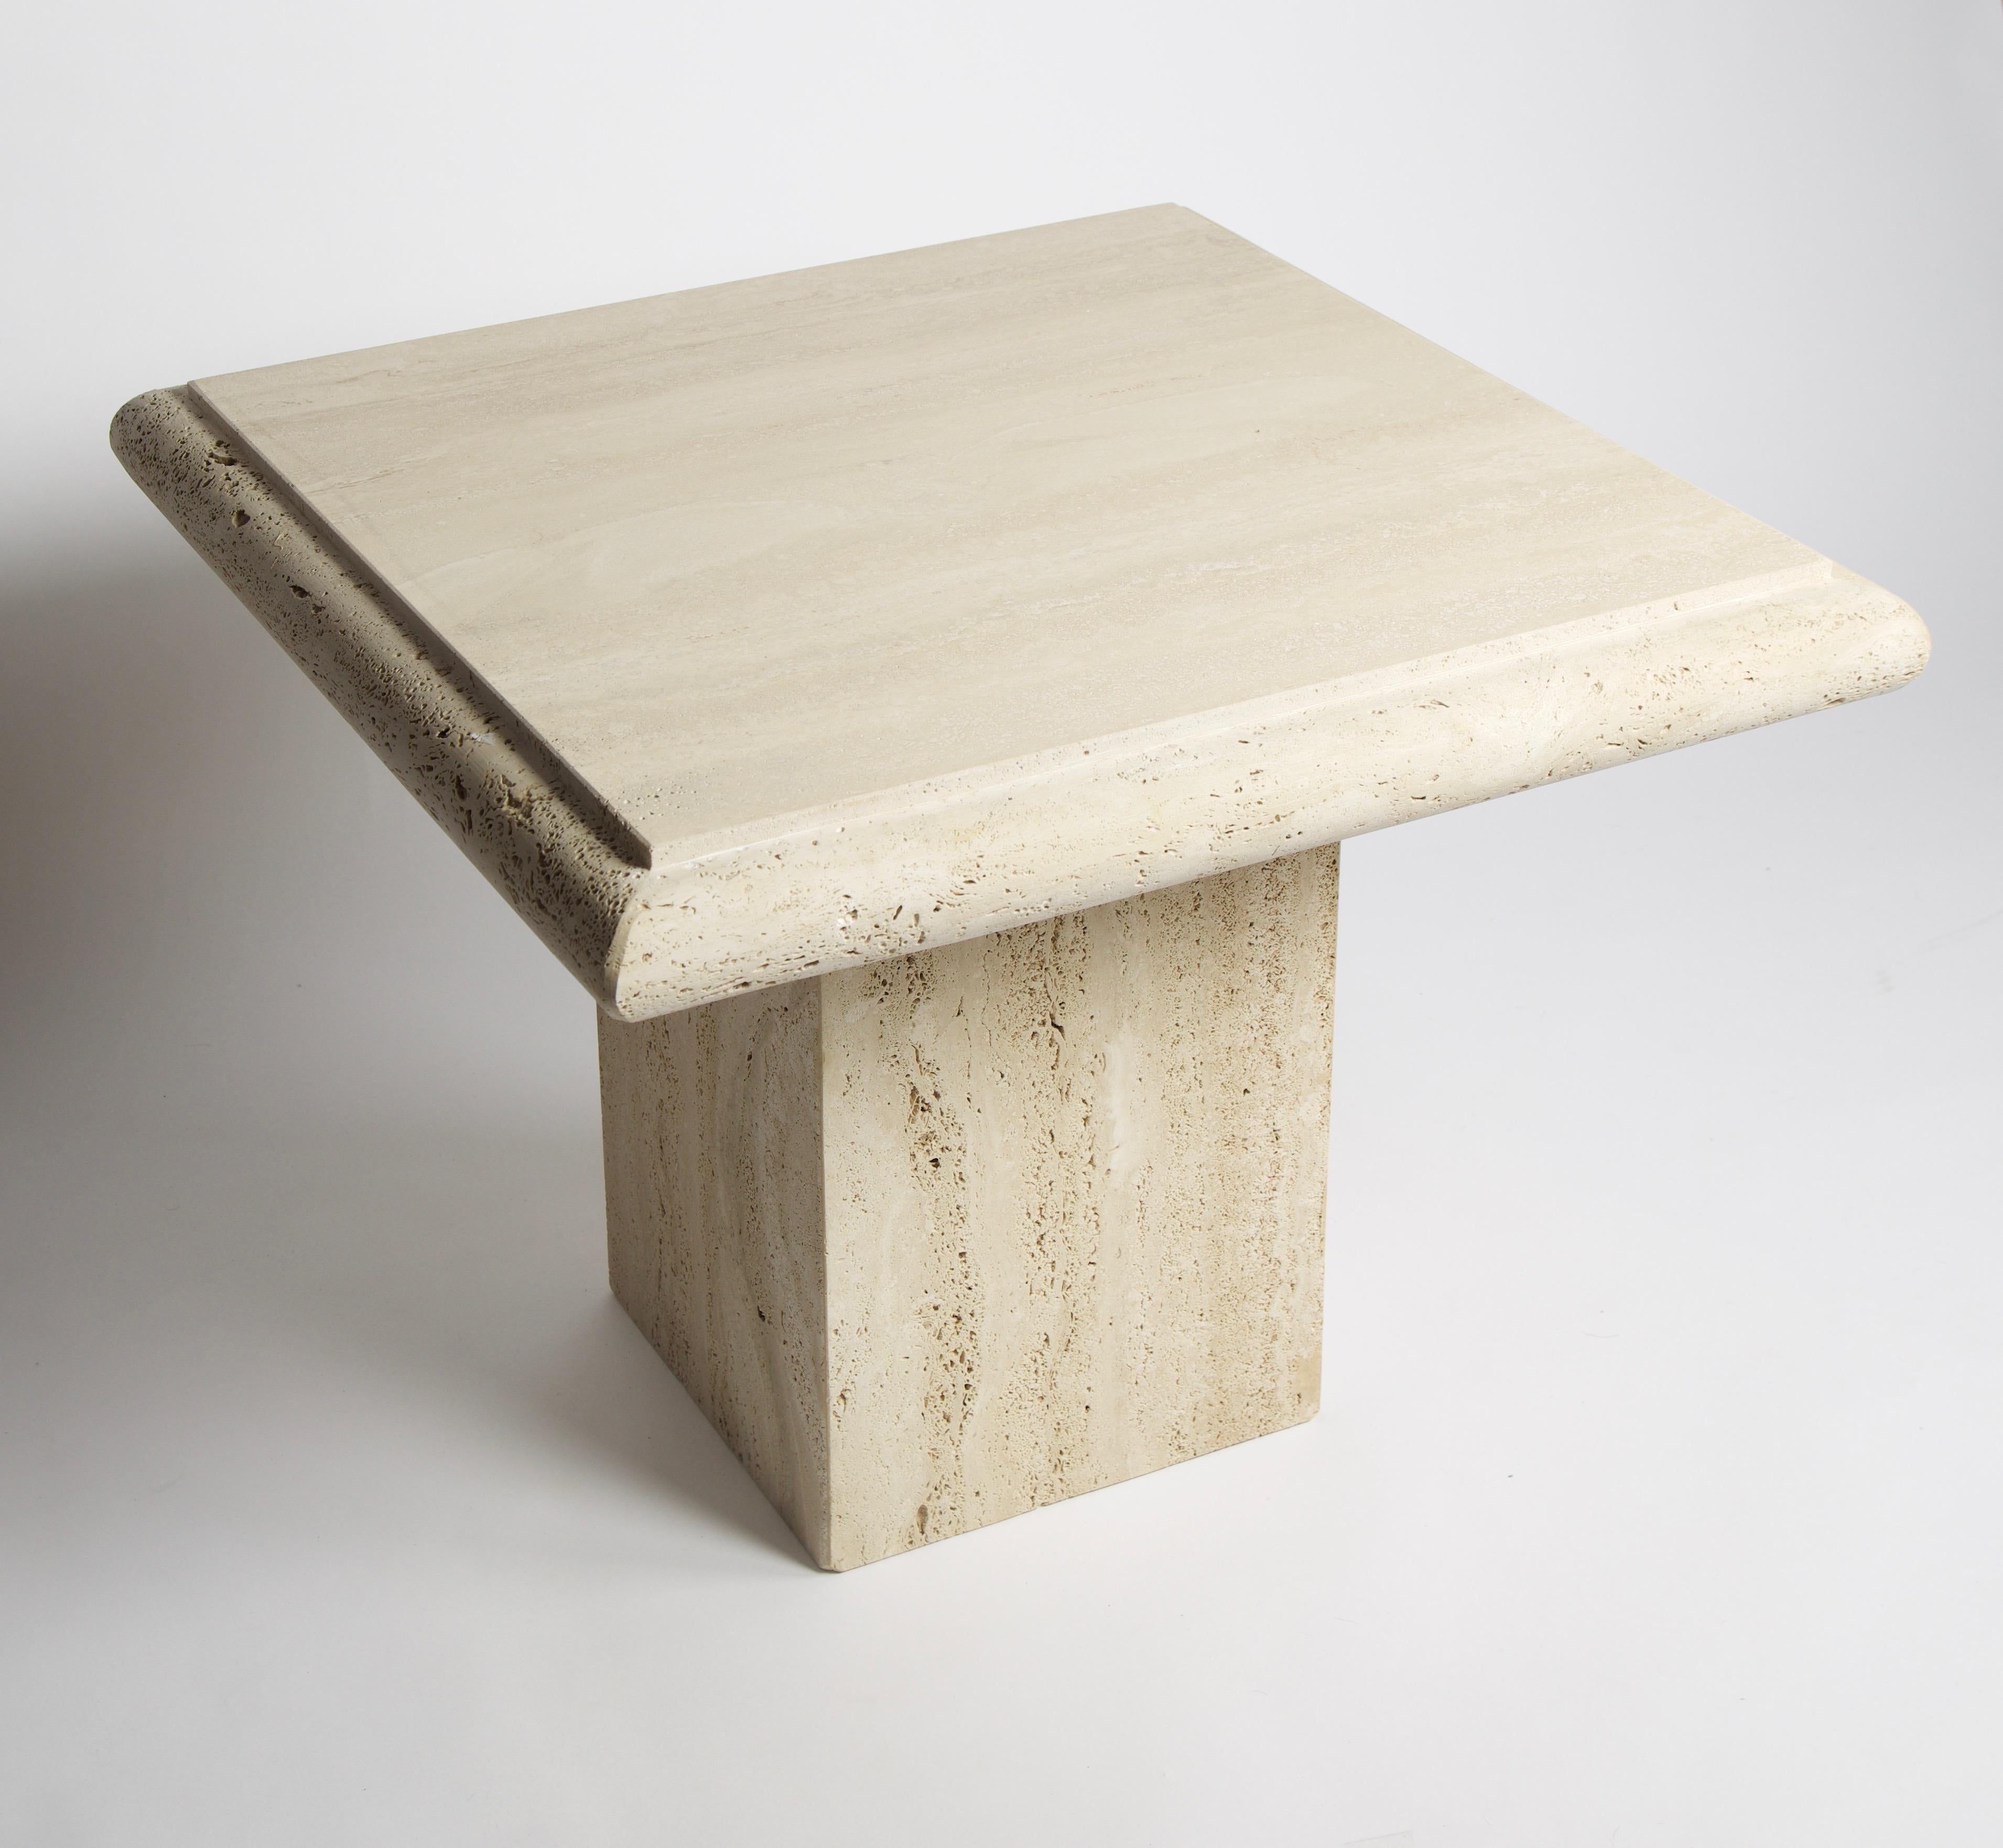 A vintage solid travertine table on a pedestal created by Stone International which was founded in 1975 just outside of Florence, Italy, the heartland of art and fashion. The table's top surface is filled and polished in contrast to the round